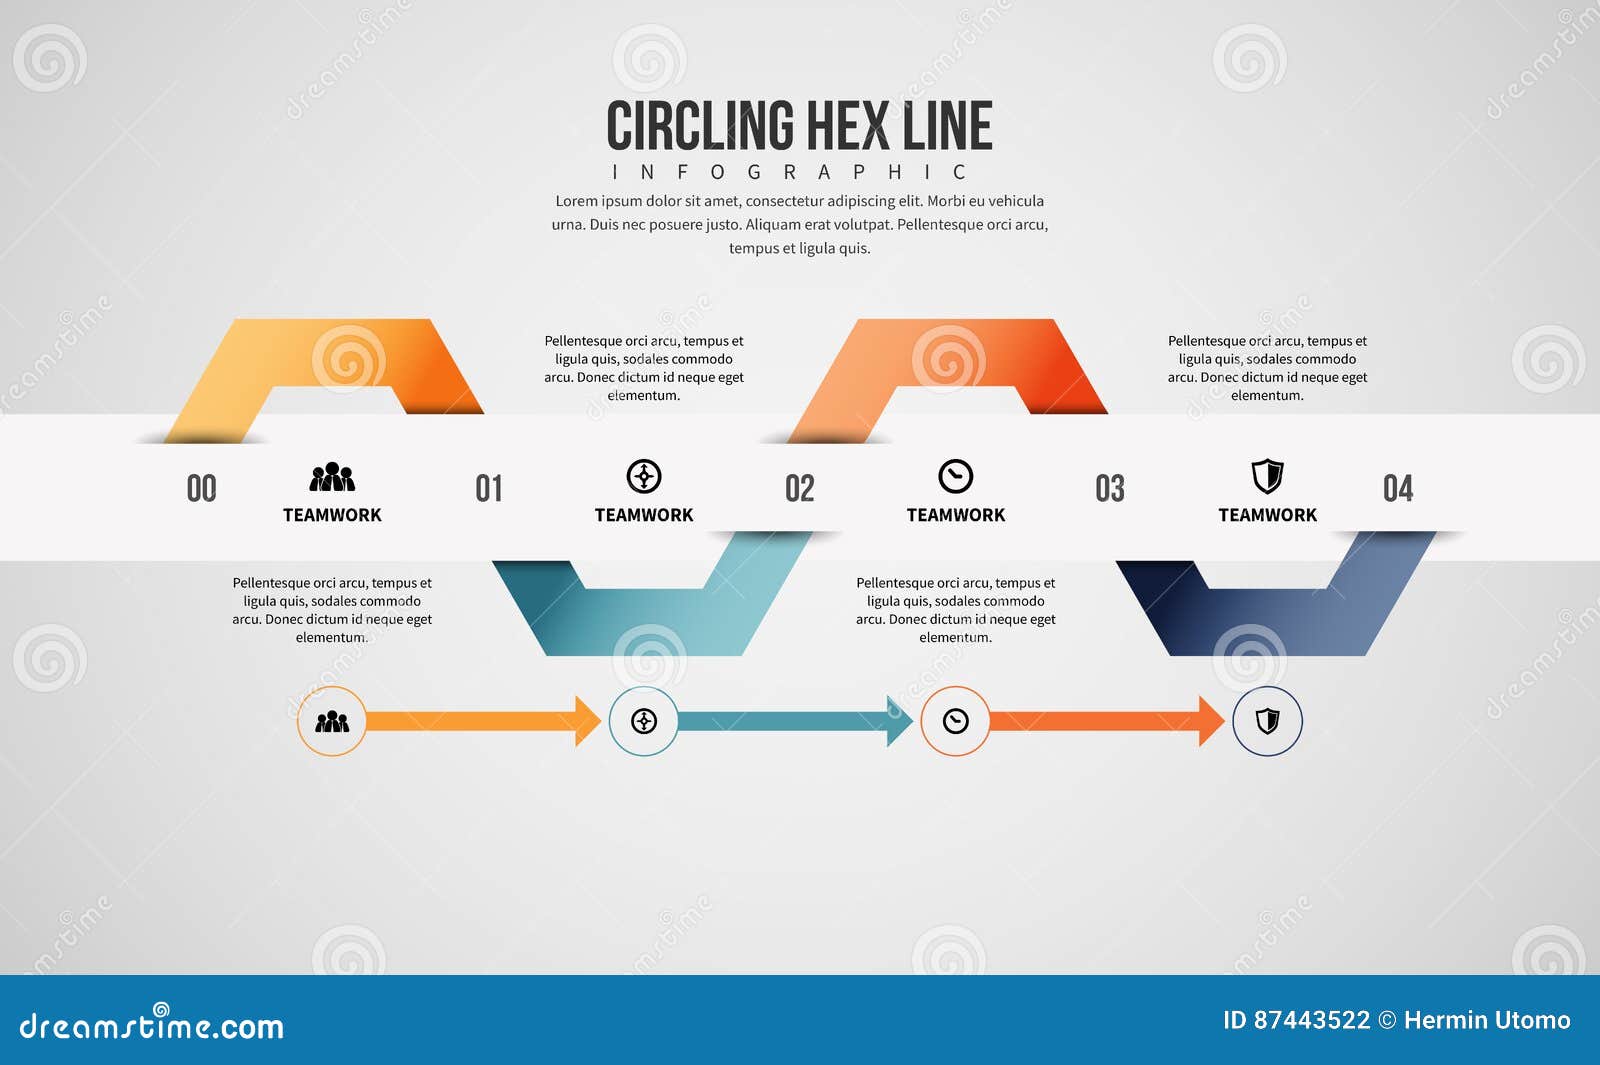 circling hex line infographic